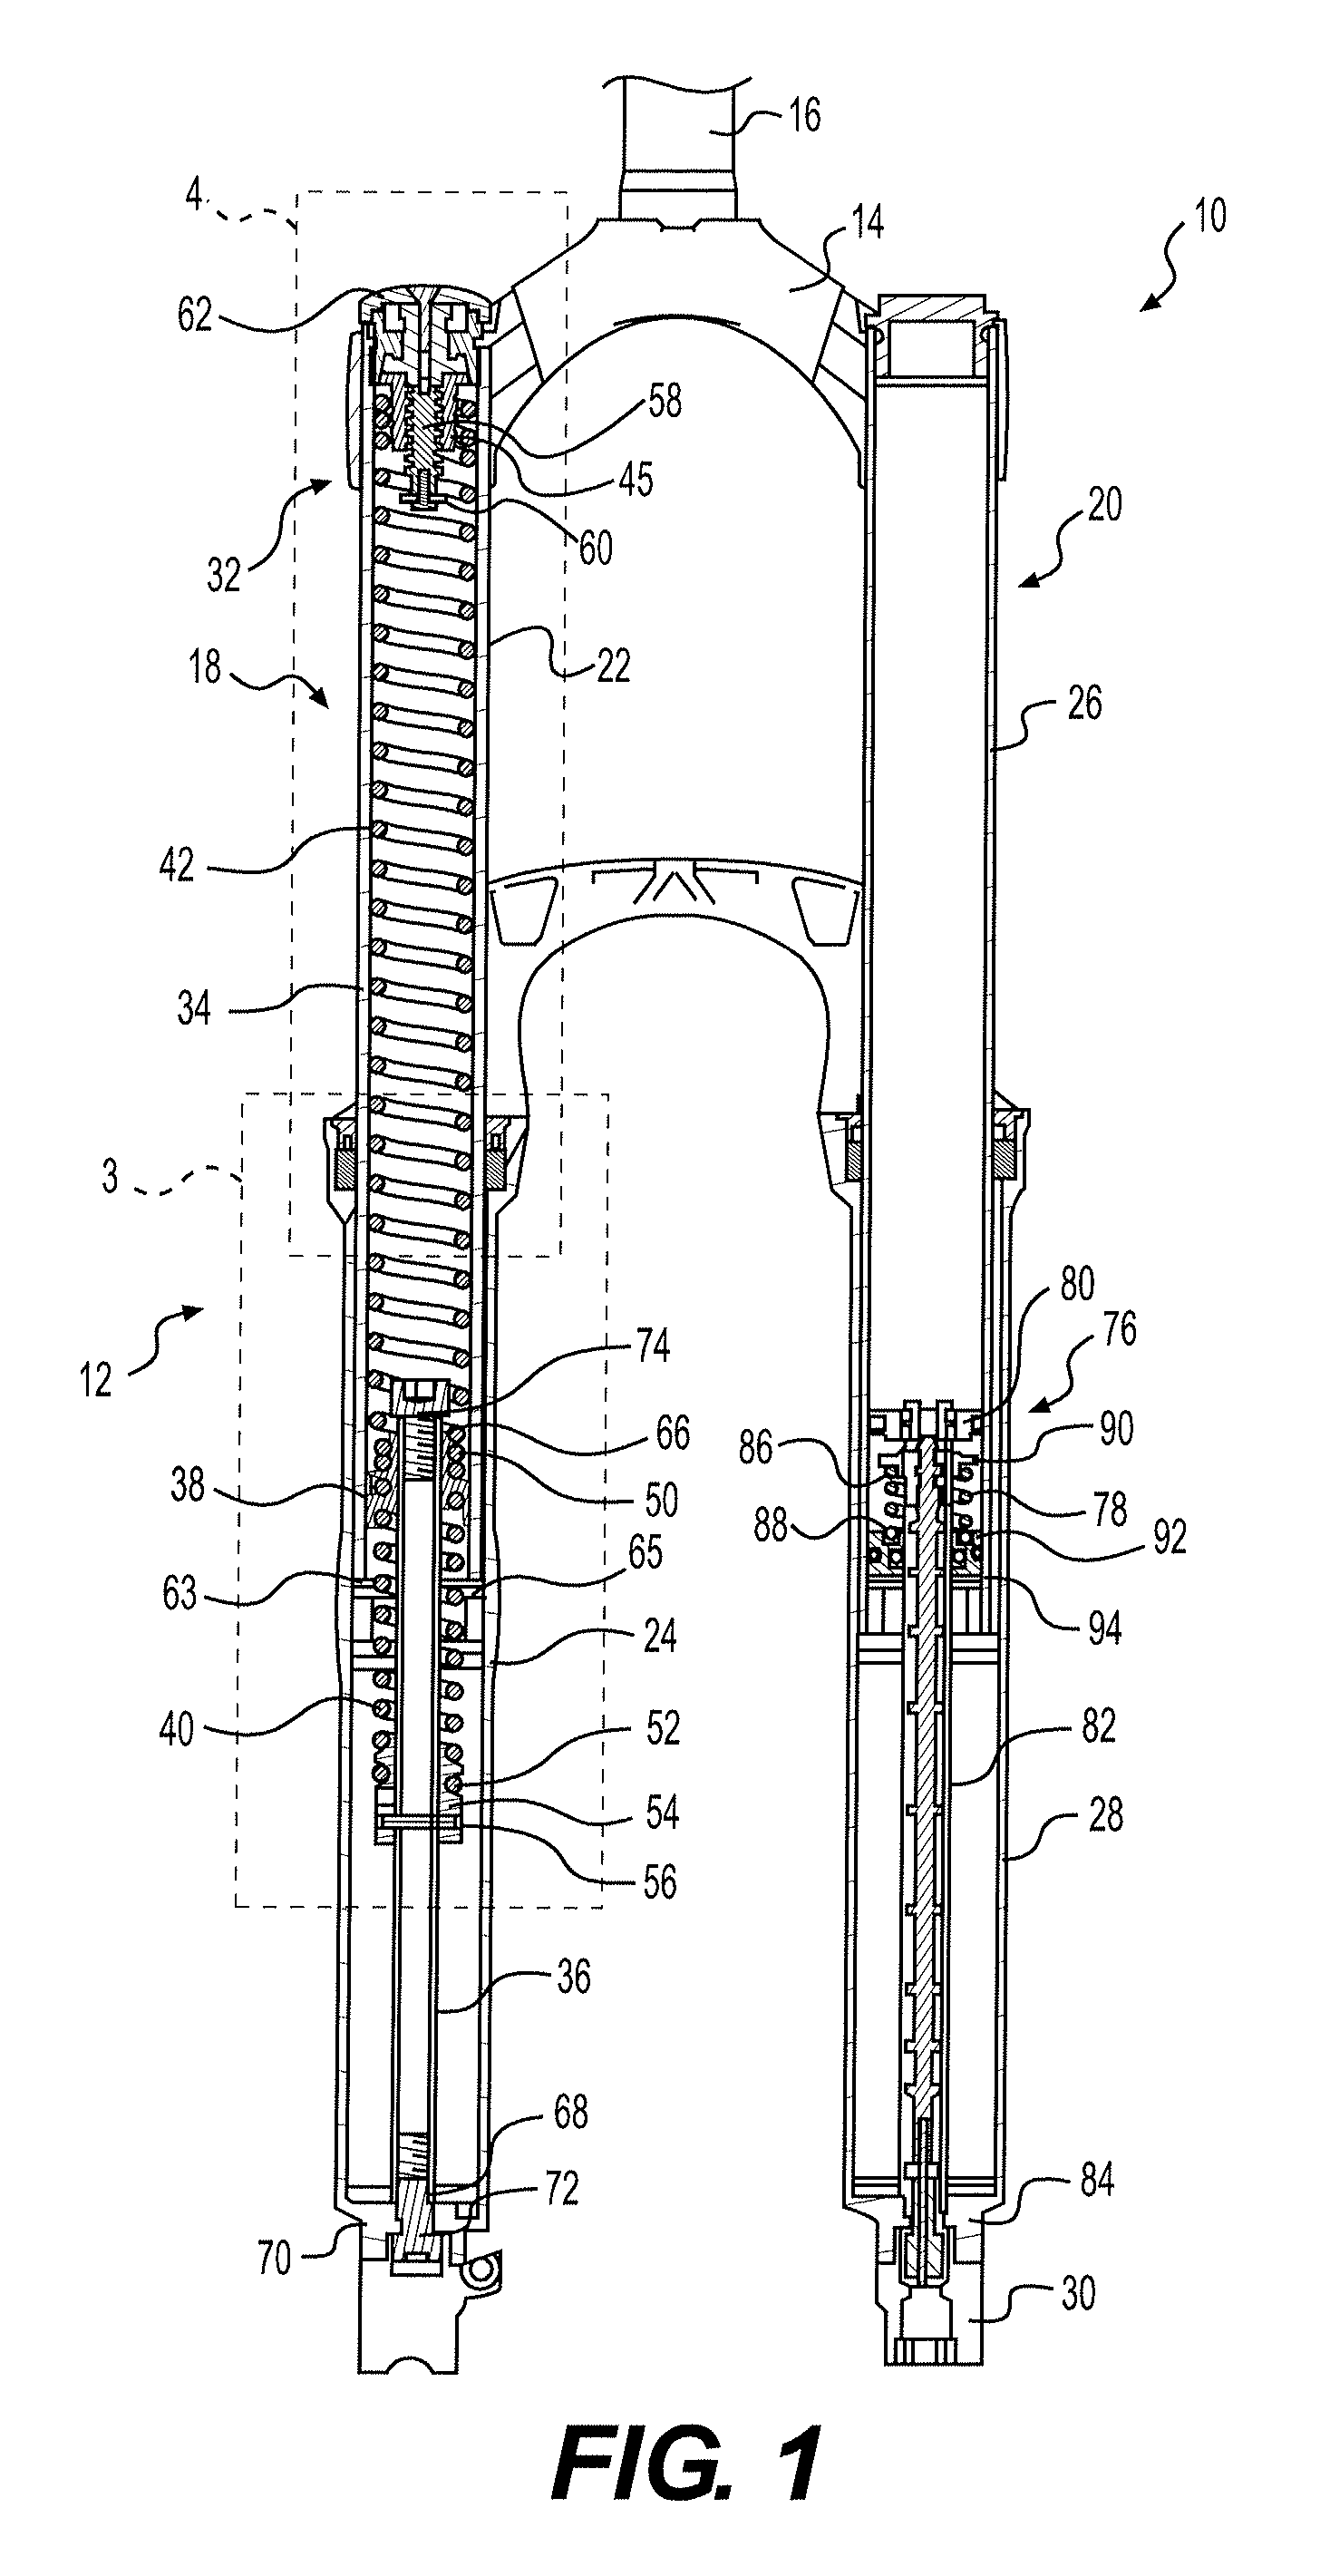 Spring Suspension for a Handlebar-Steered Vehicle